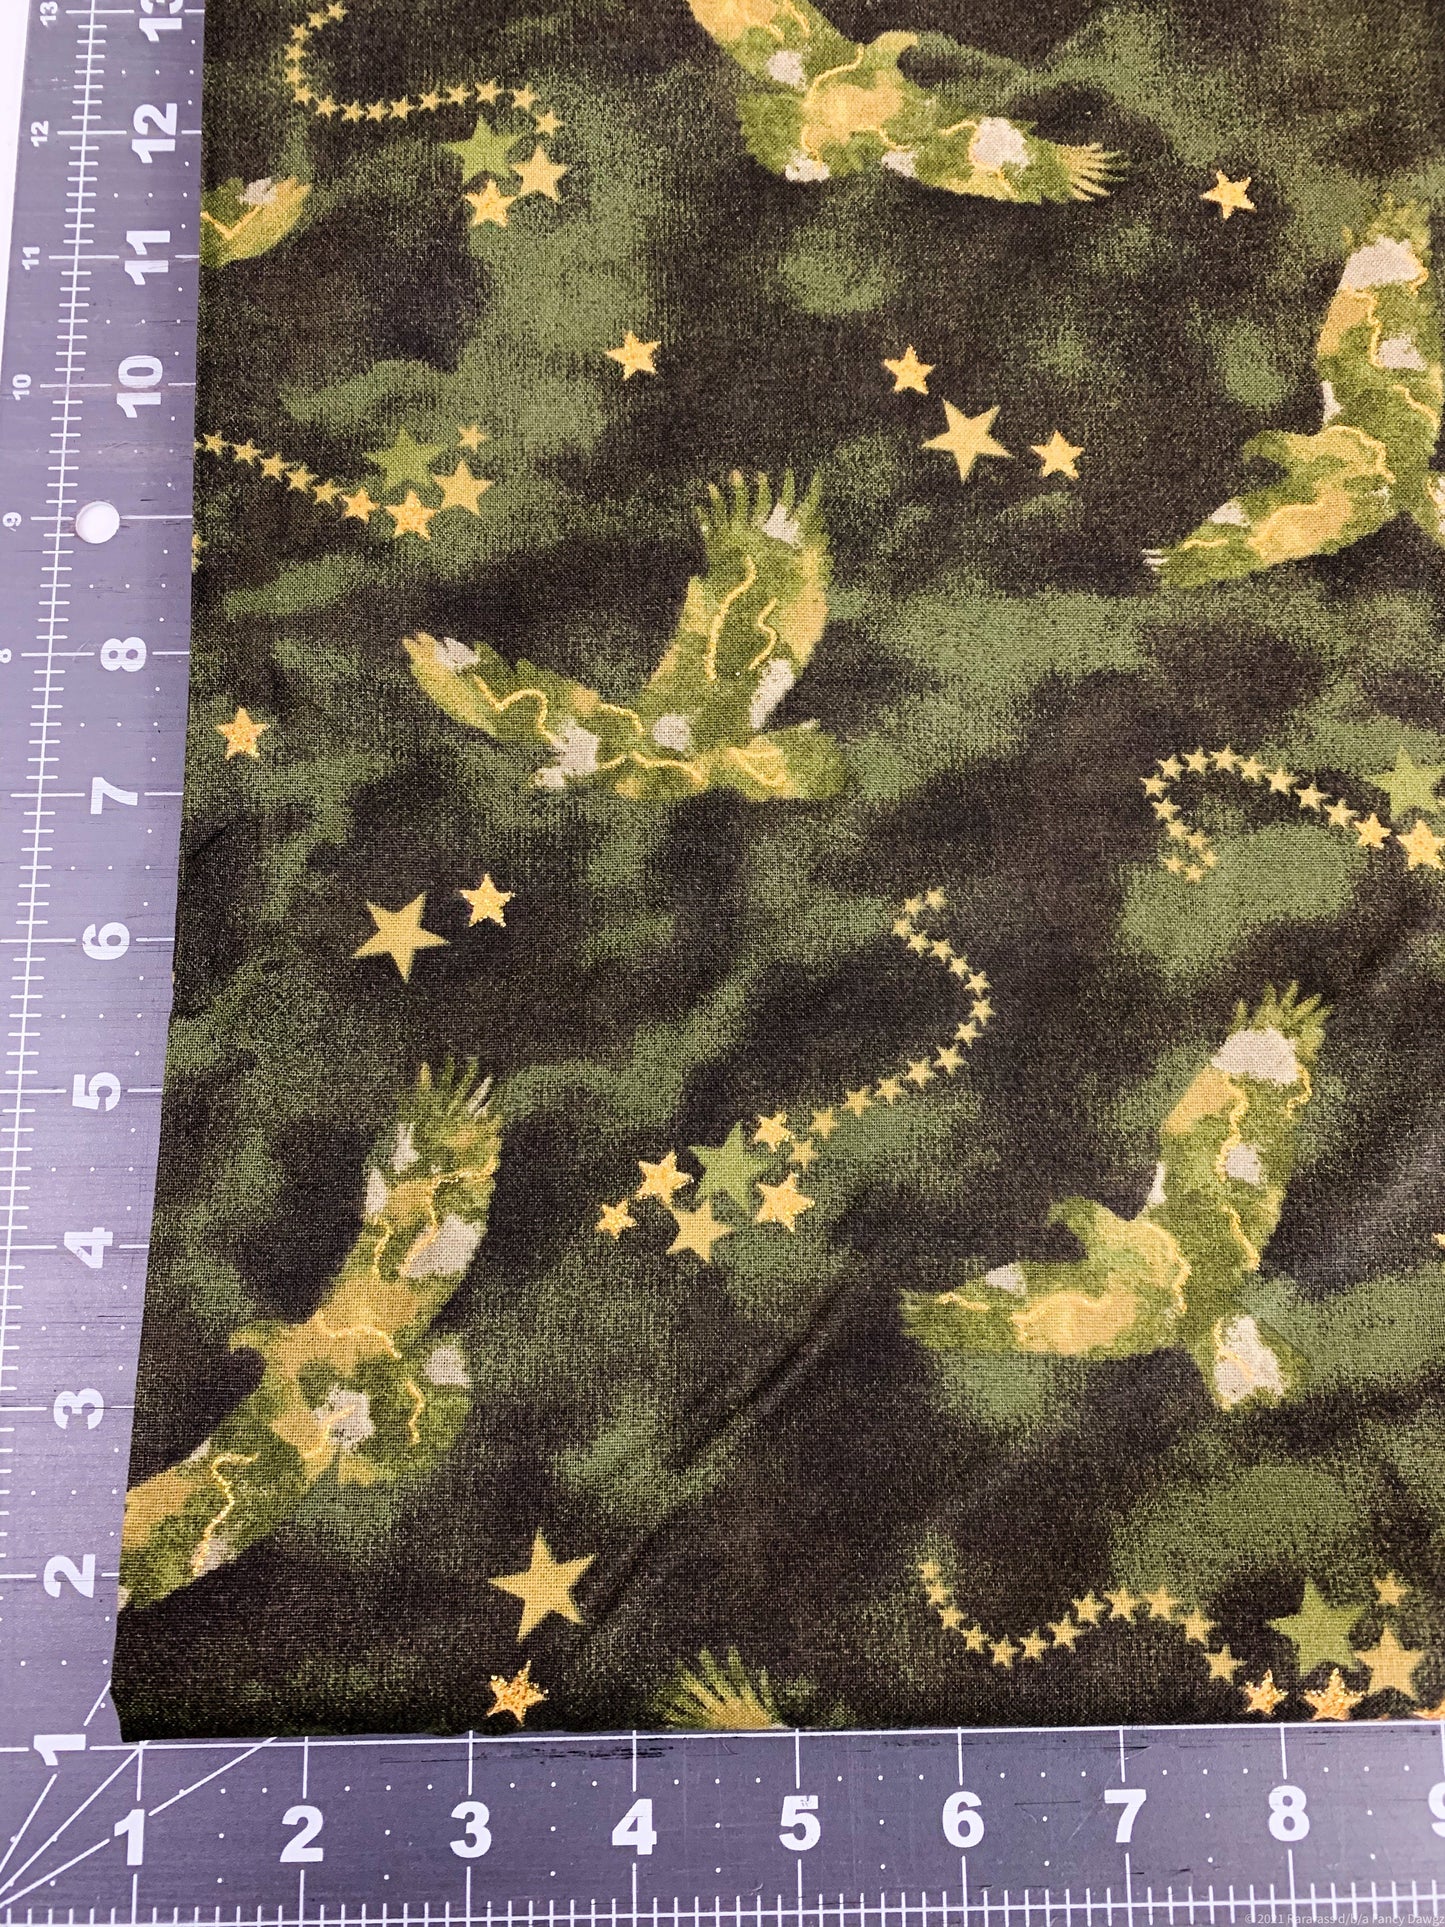 Army Green Eagle fabric 16702 Eagles with Metallic Gold